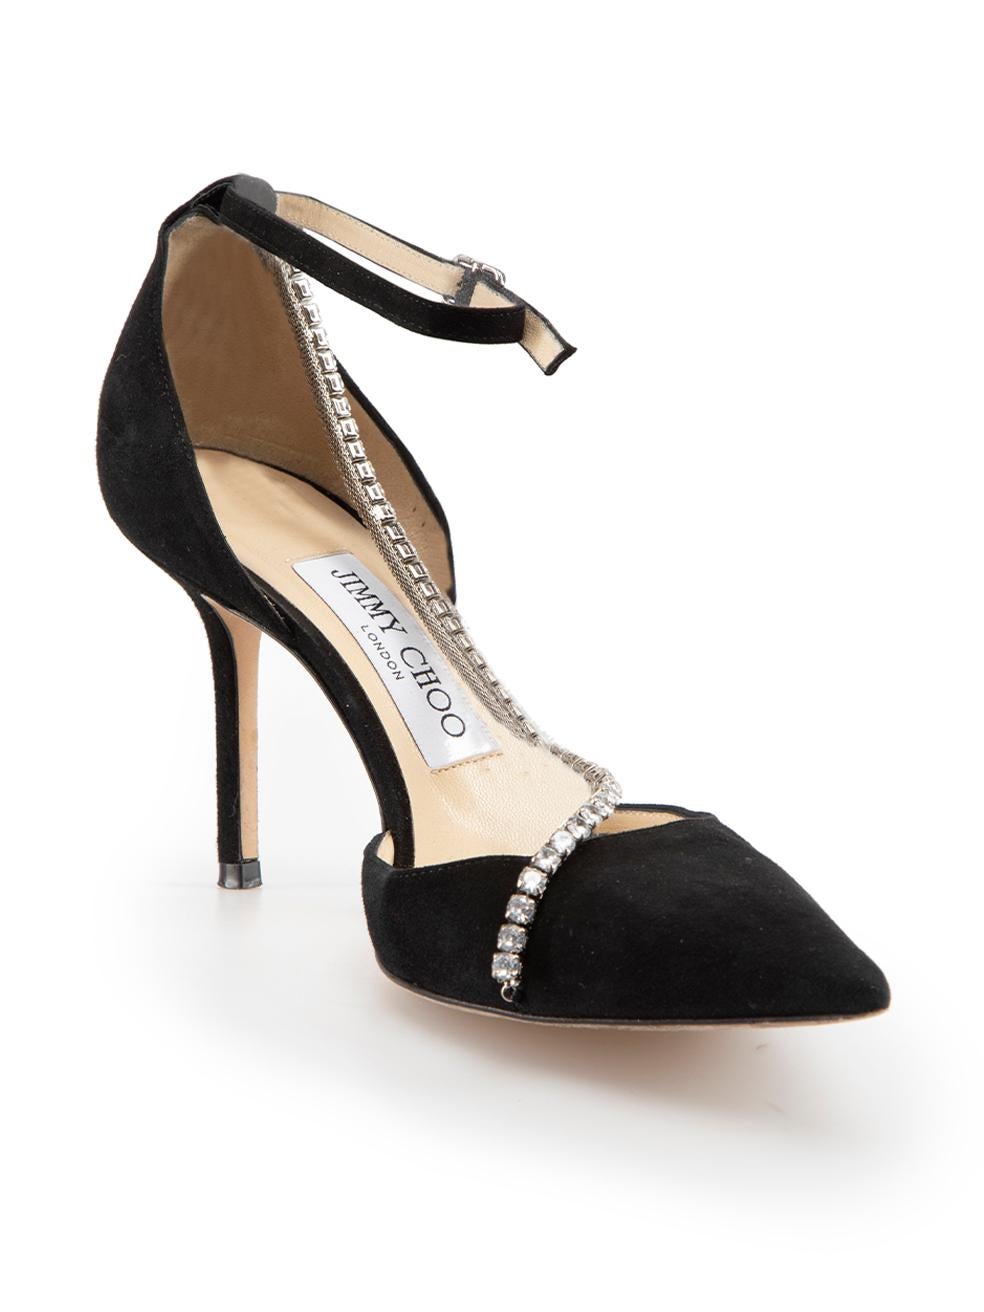 CONDITION is Very good. Minimal wear to shoes is evident. Minimal wear to the right shoe heel with indents to the leather on this used Jimmy Choo designer resale item. These shoes come with original dust bag.
 
Details
Talika
Black
Suede
Slip on